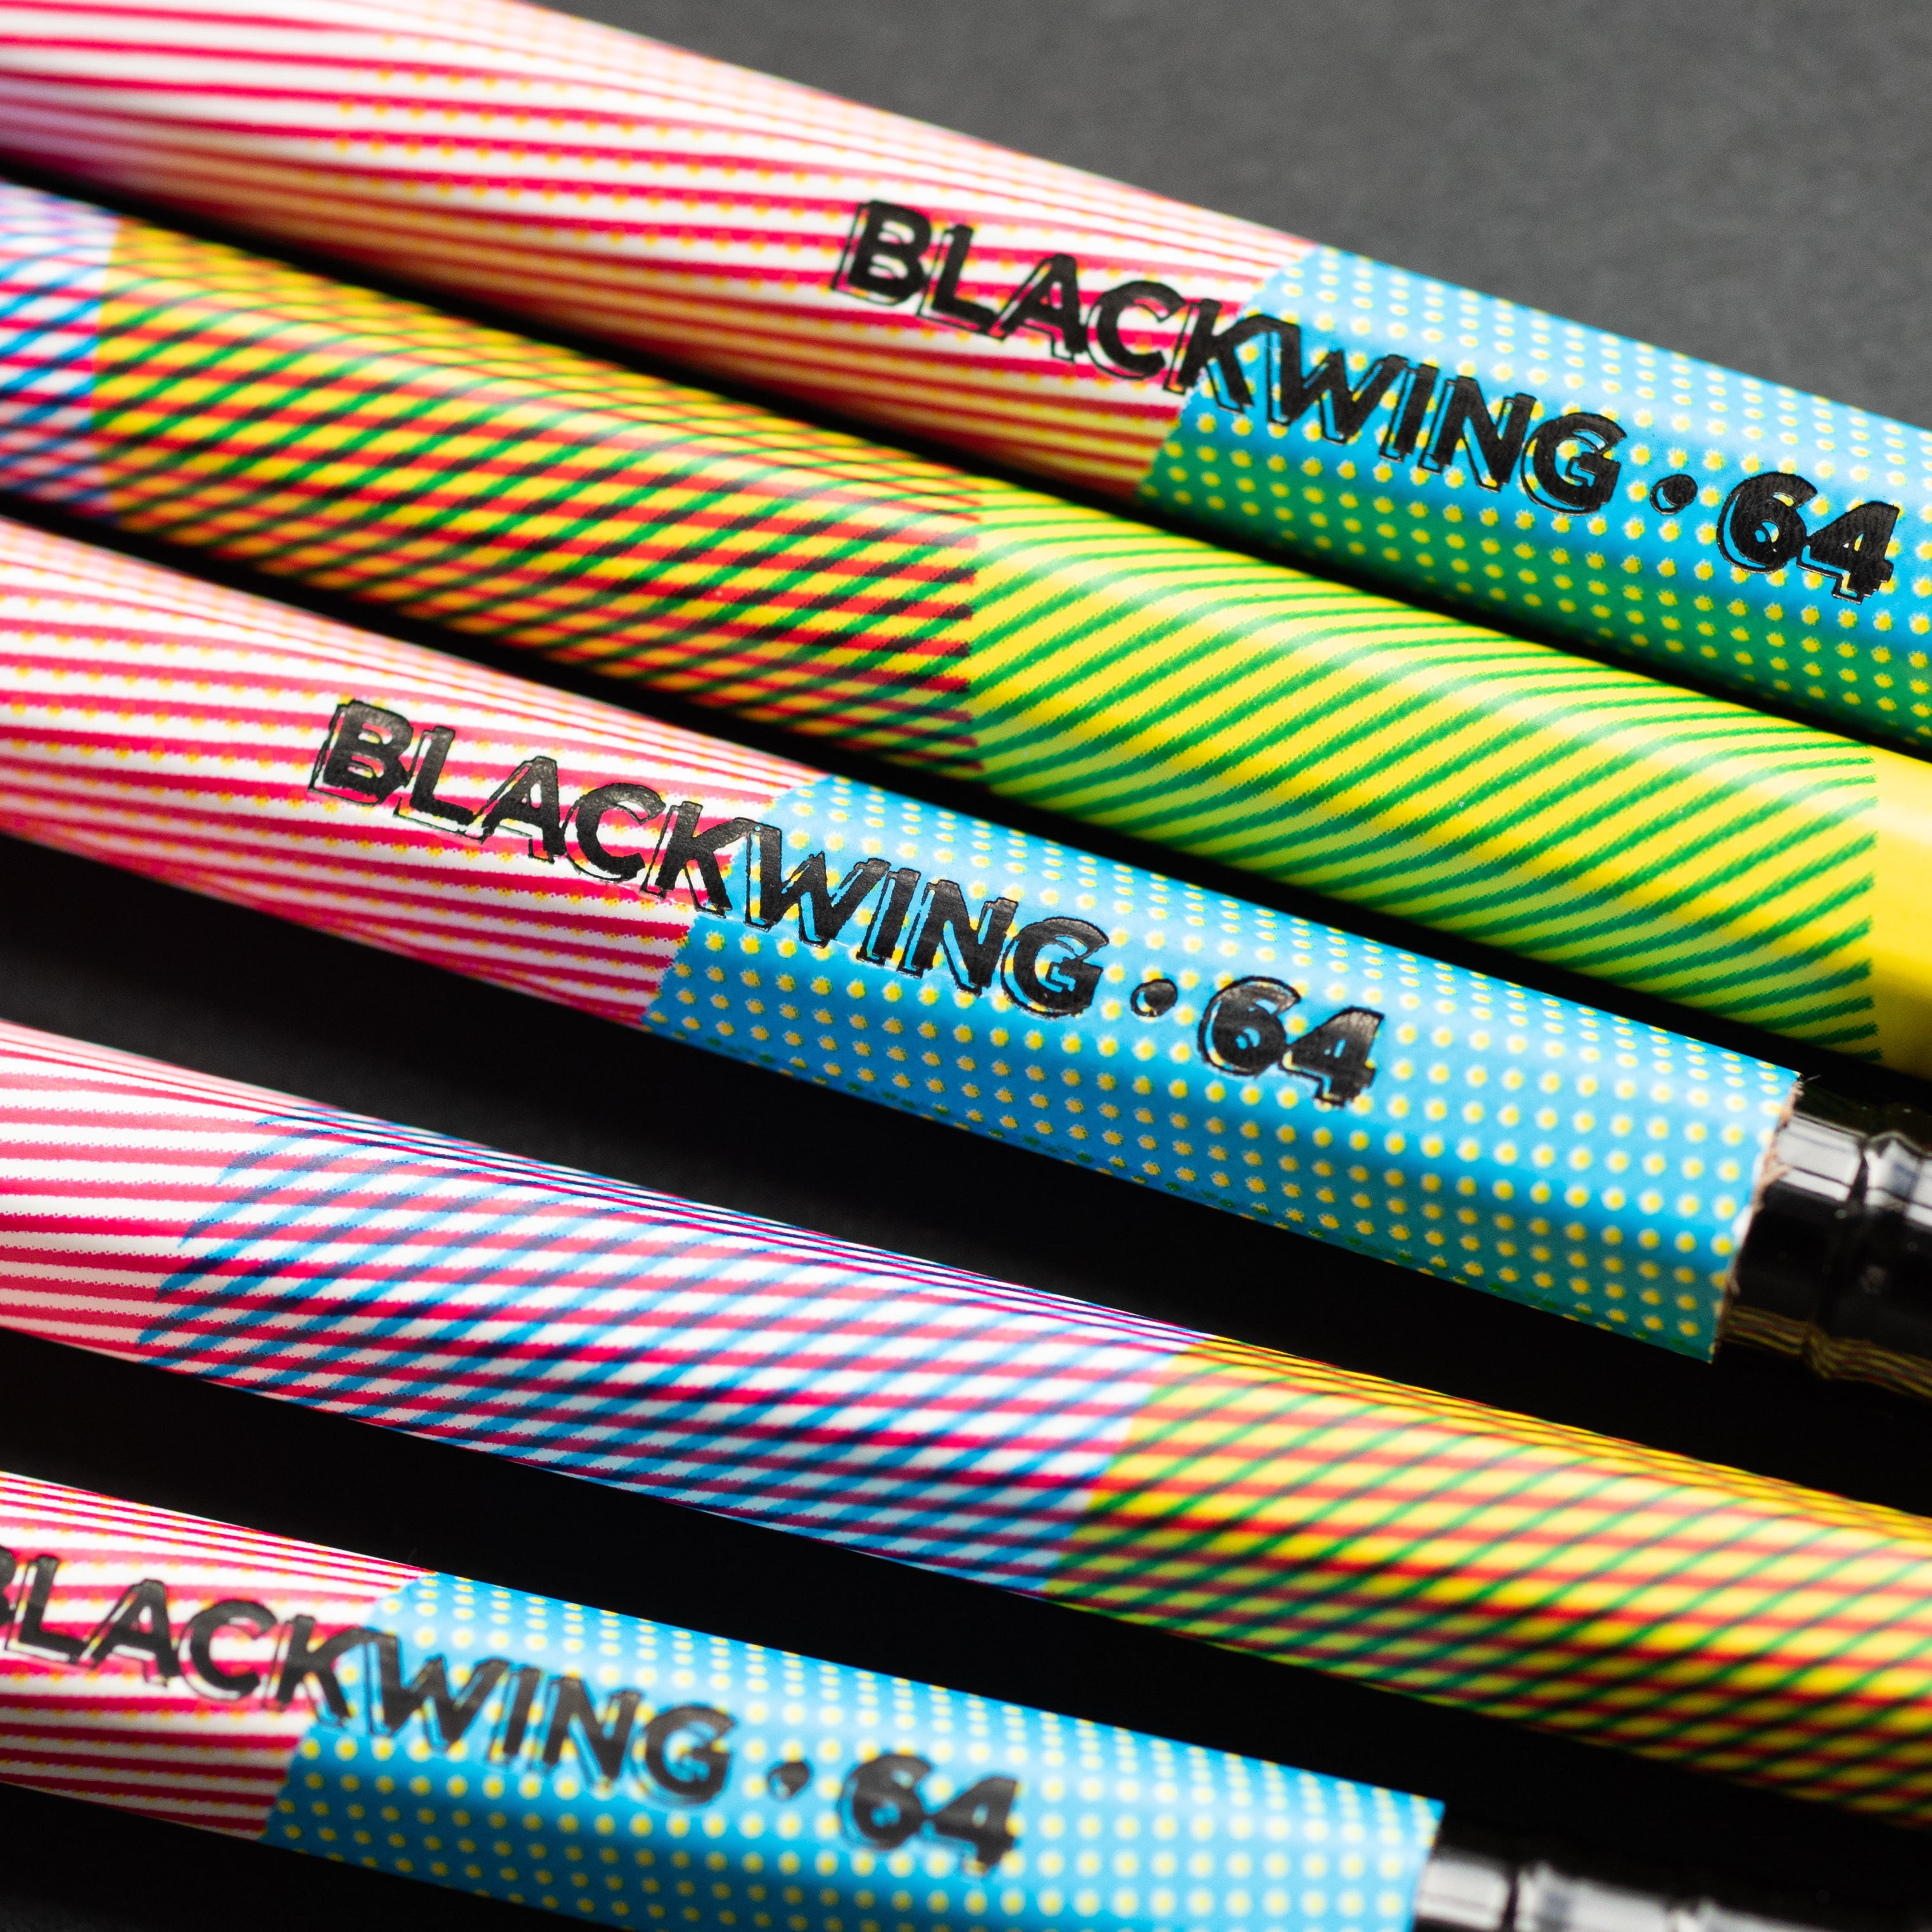 A set of Blackwing Volume 64 pencils on a black surface, perfect for creating comic book art.